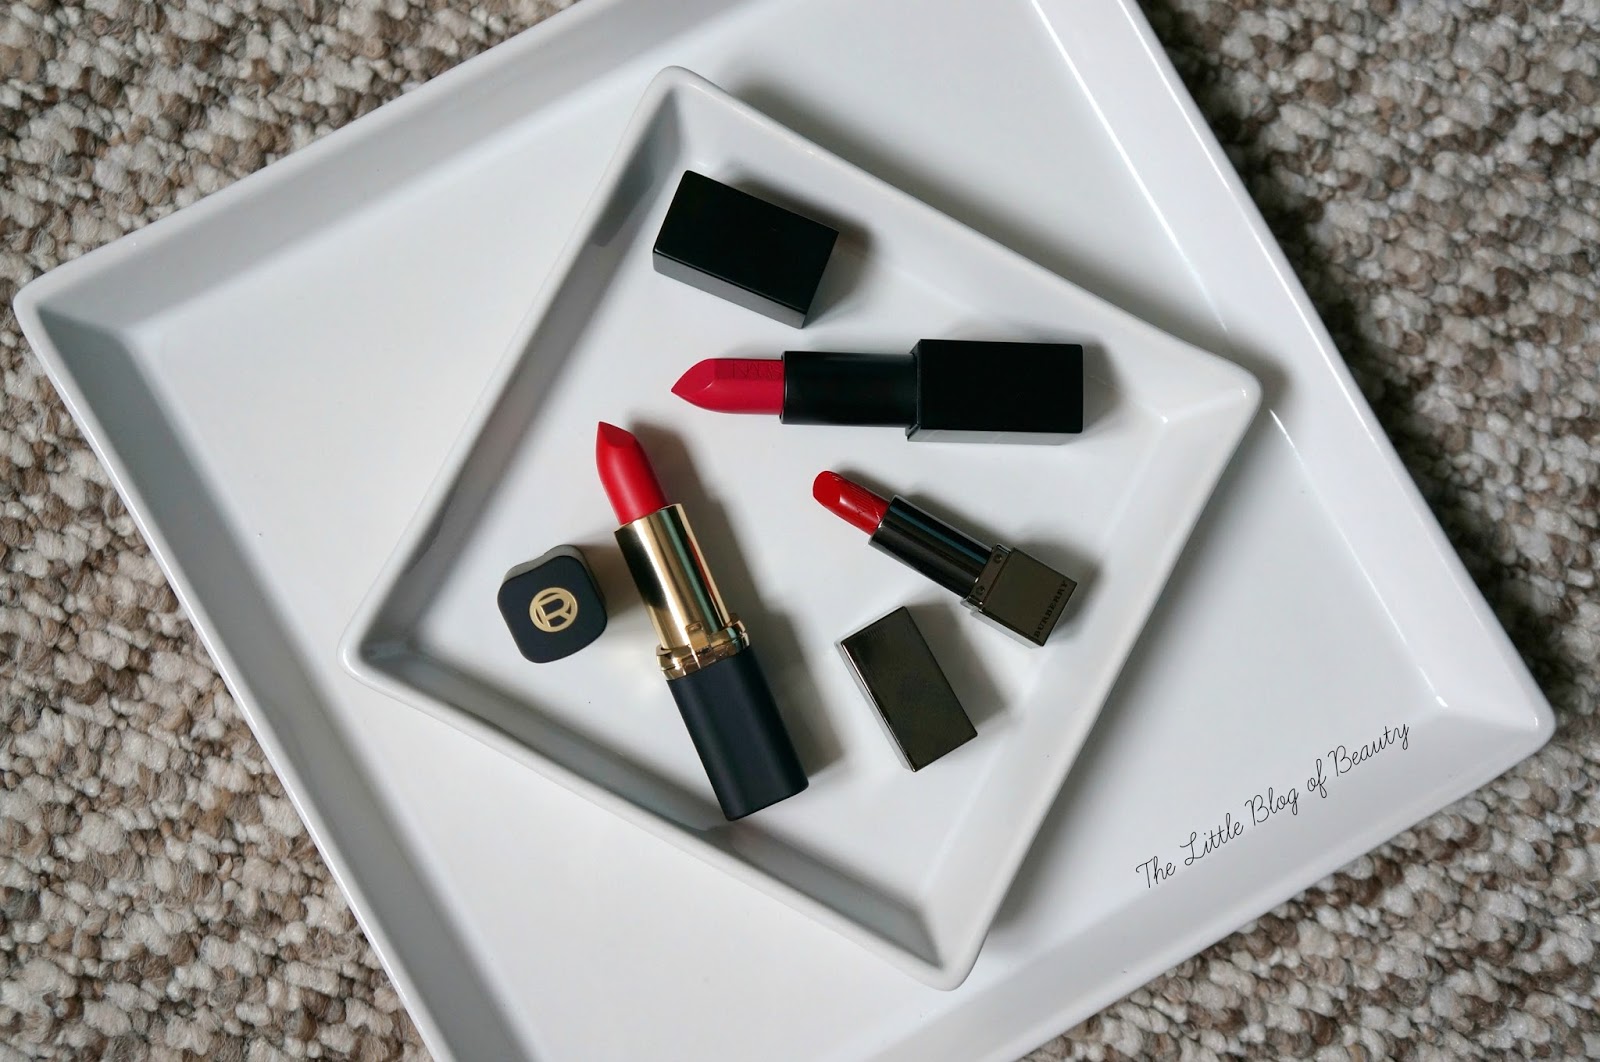 NARS Audacious Greta, L'Oreal Collection Exclusive Pure red by Julianne and Burberry Kisses in Military red